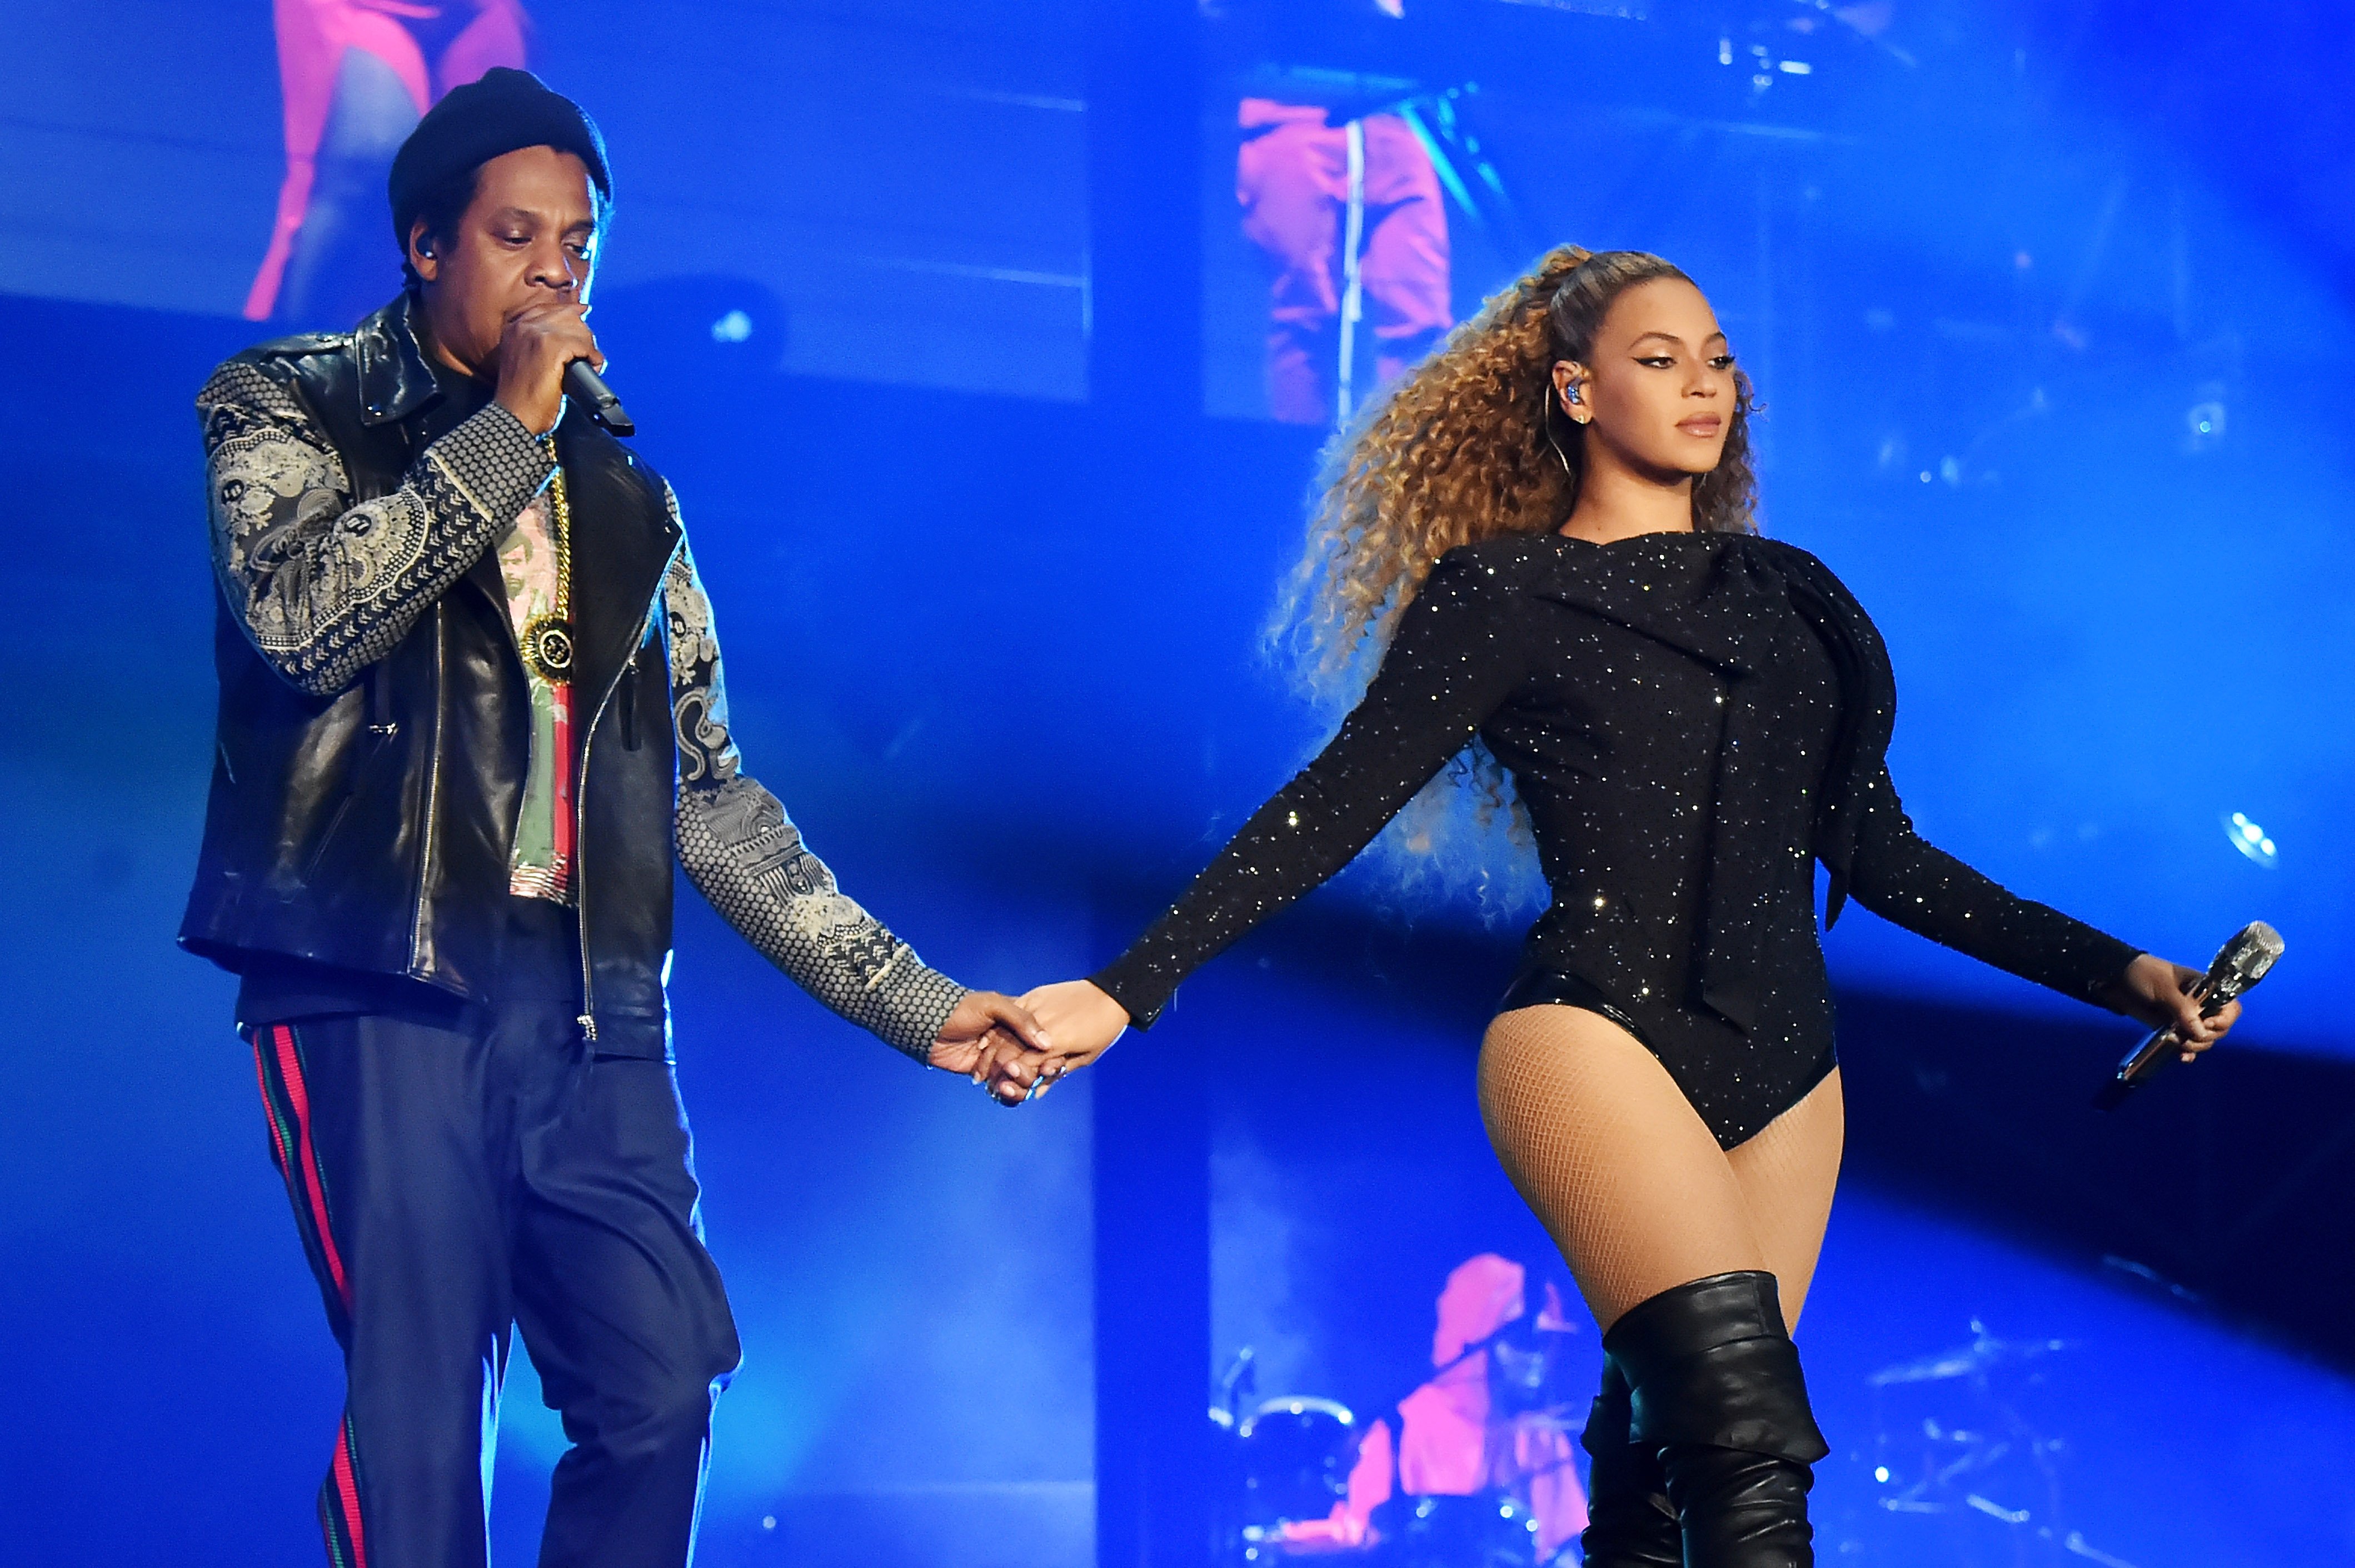 Jay-Z and Beyoncé pictured performing together during the "On the Run II" tour on June 6, 2018 in Cardiff, Wales. | Source: Getty Images